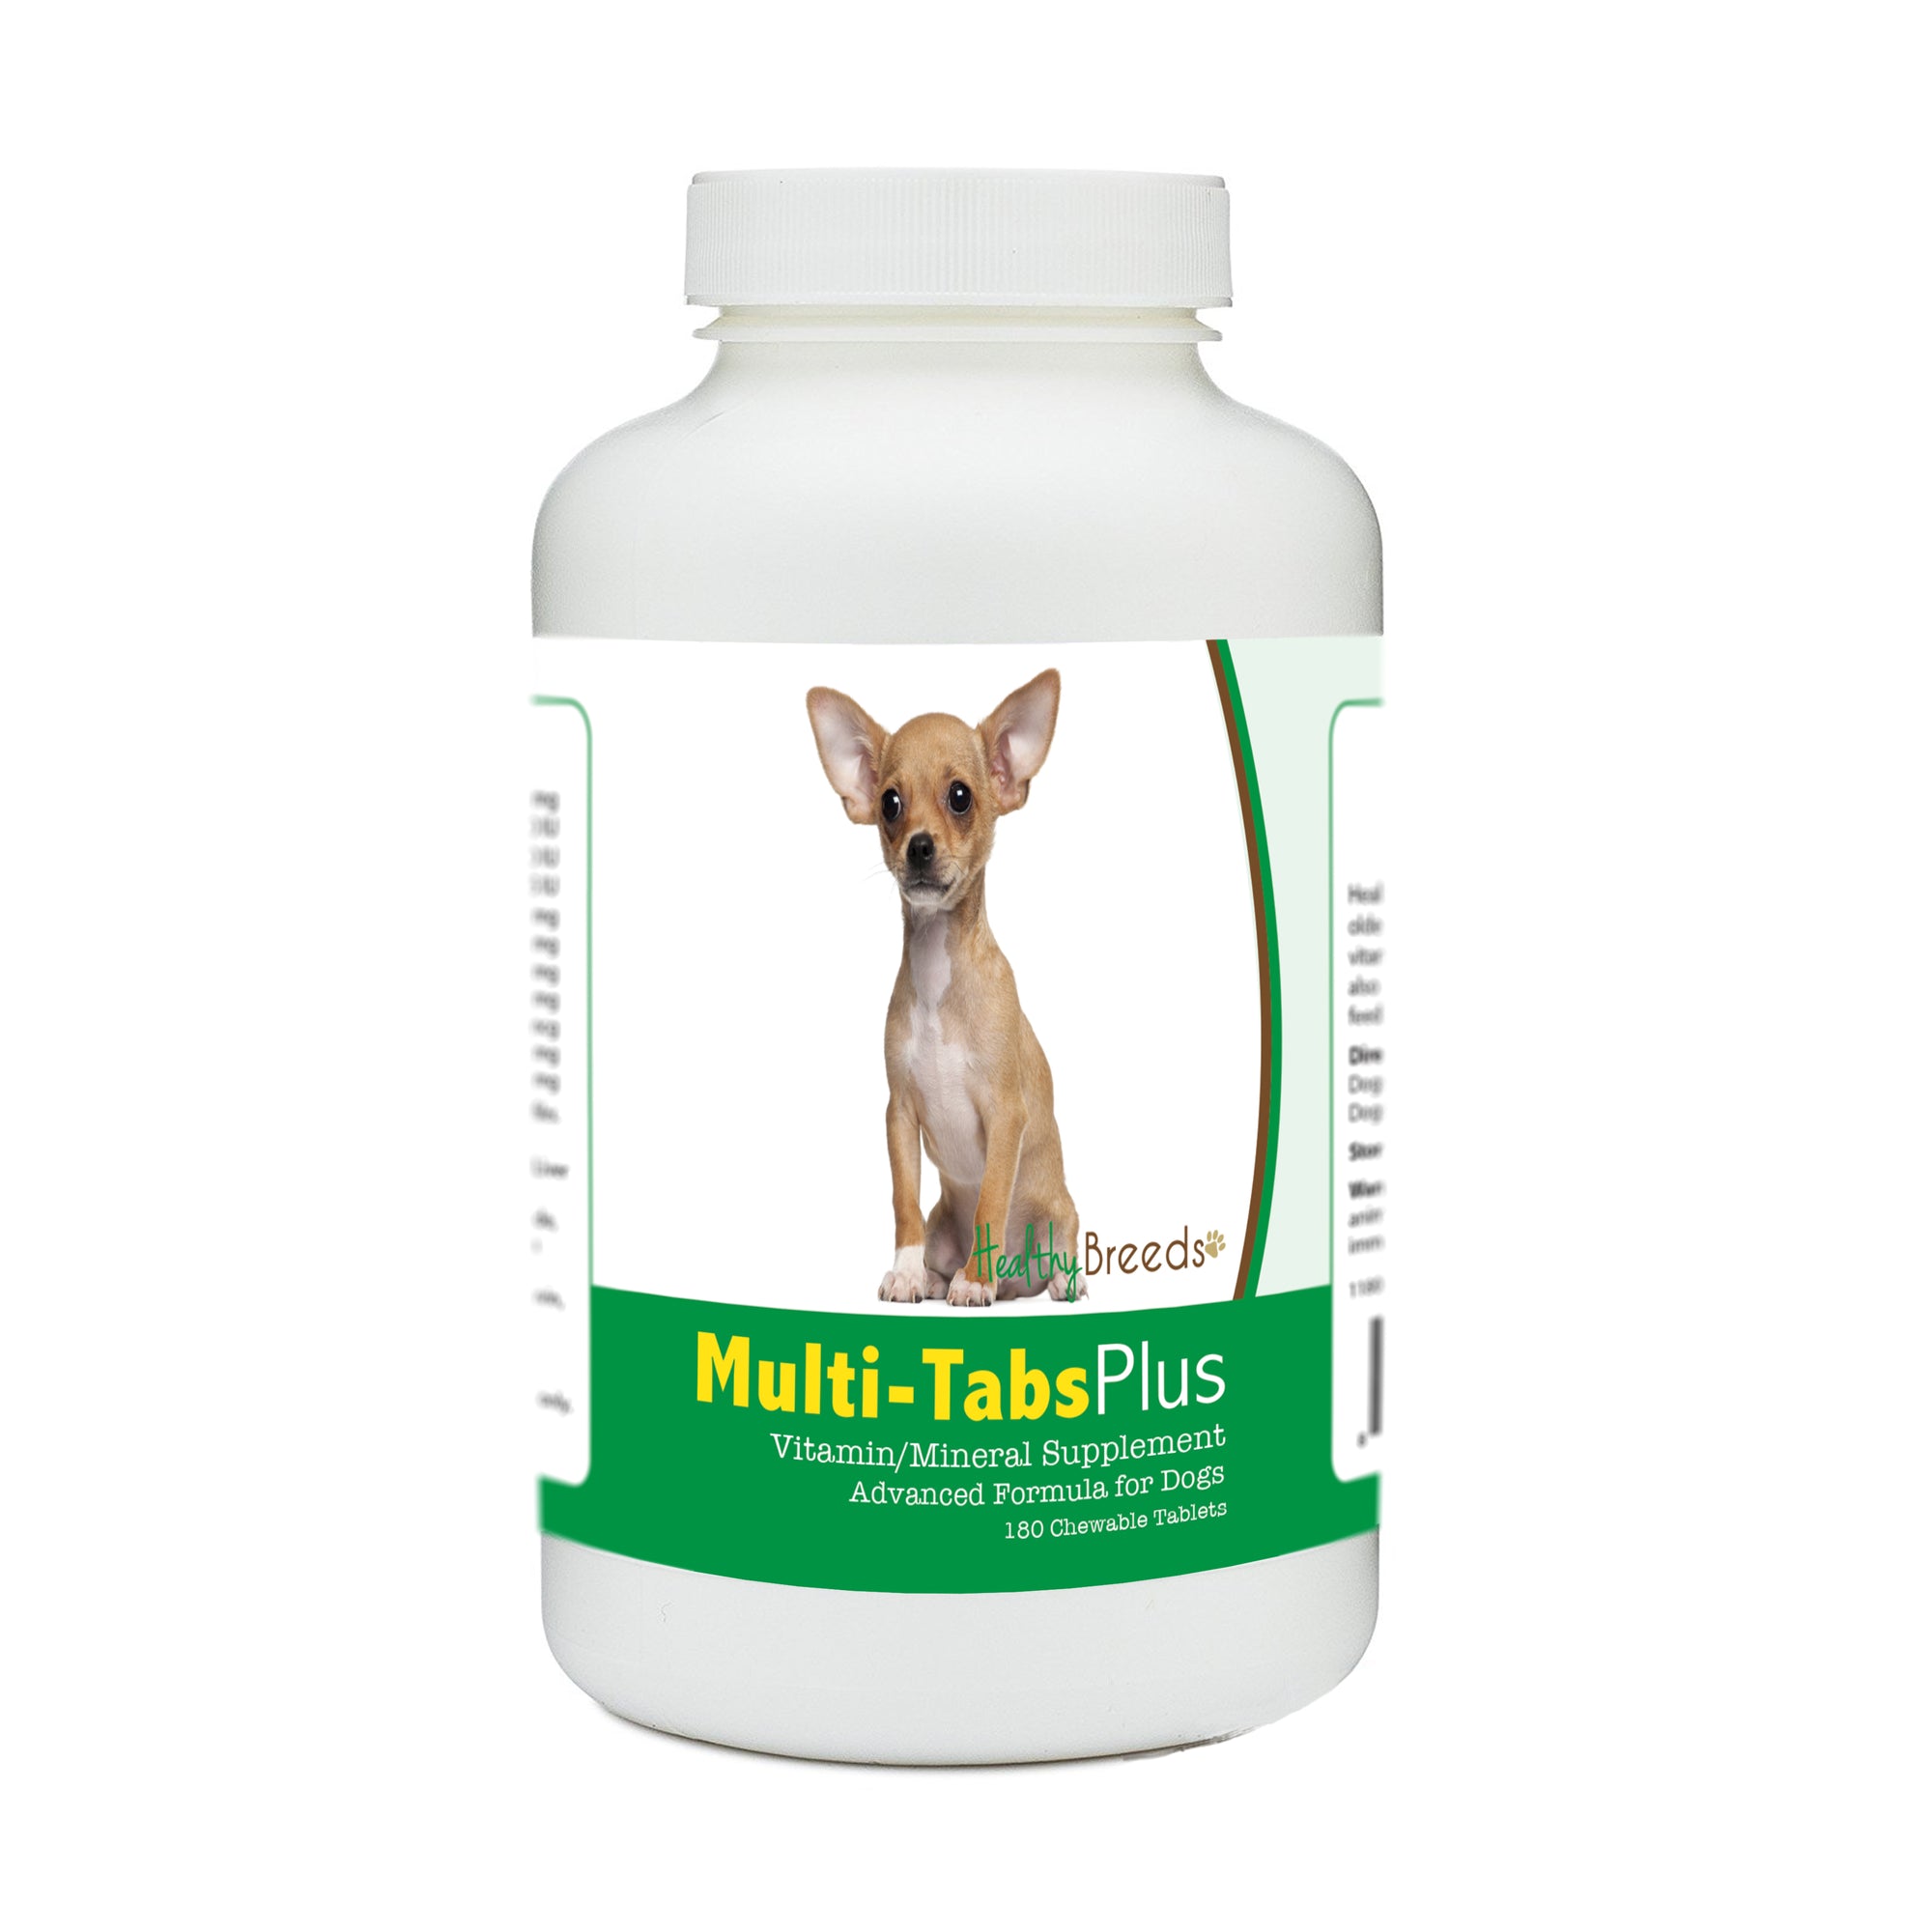 Healthy Breeds Chihuahua Multi-Tabs Plus Chewable Tablets 180 Count